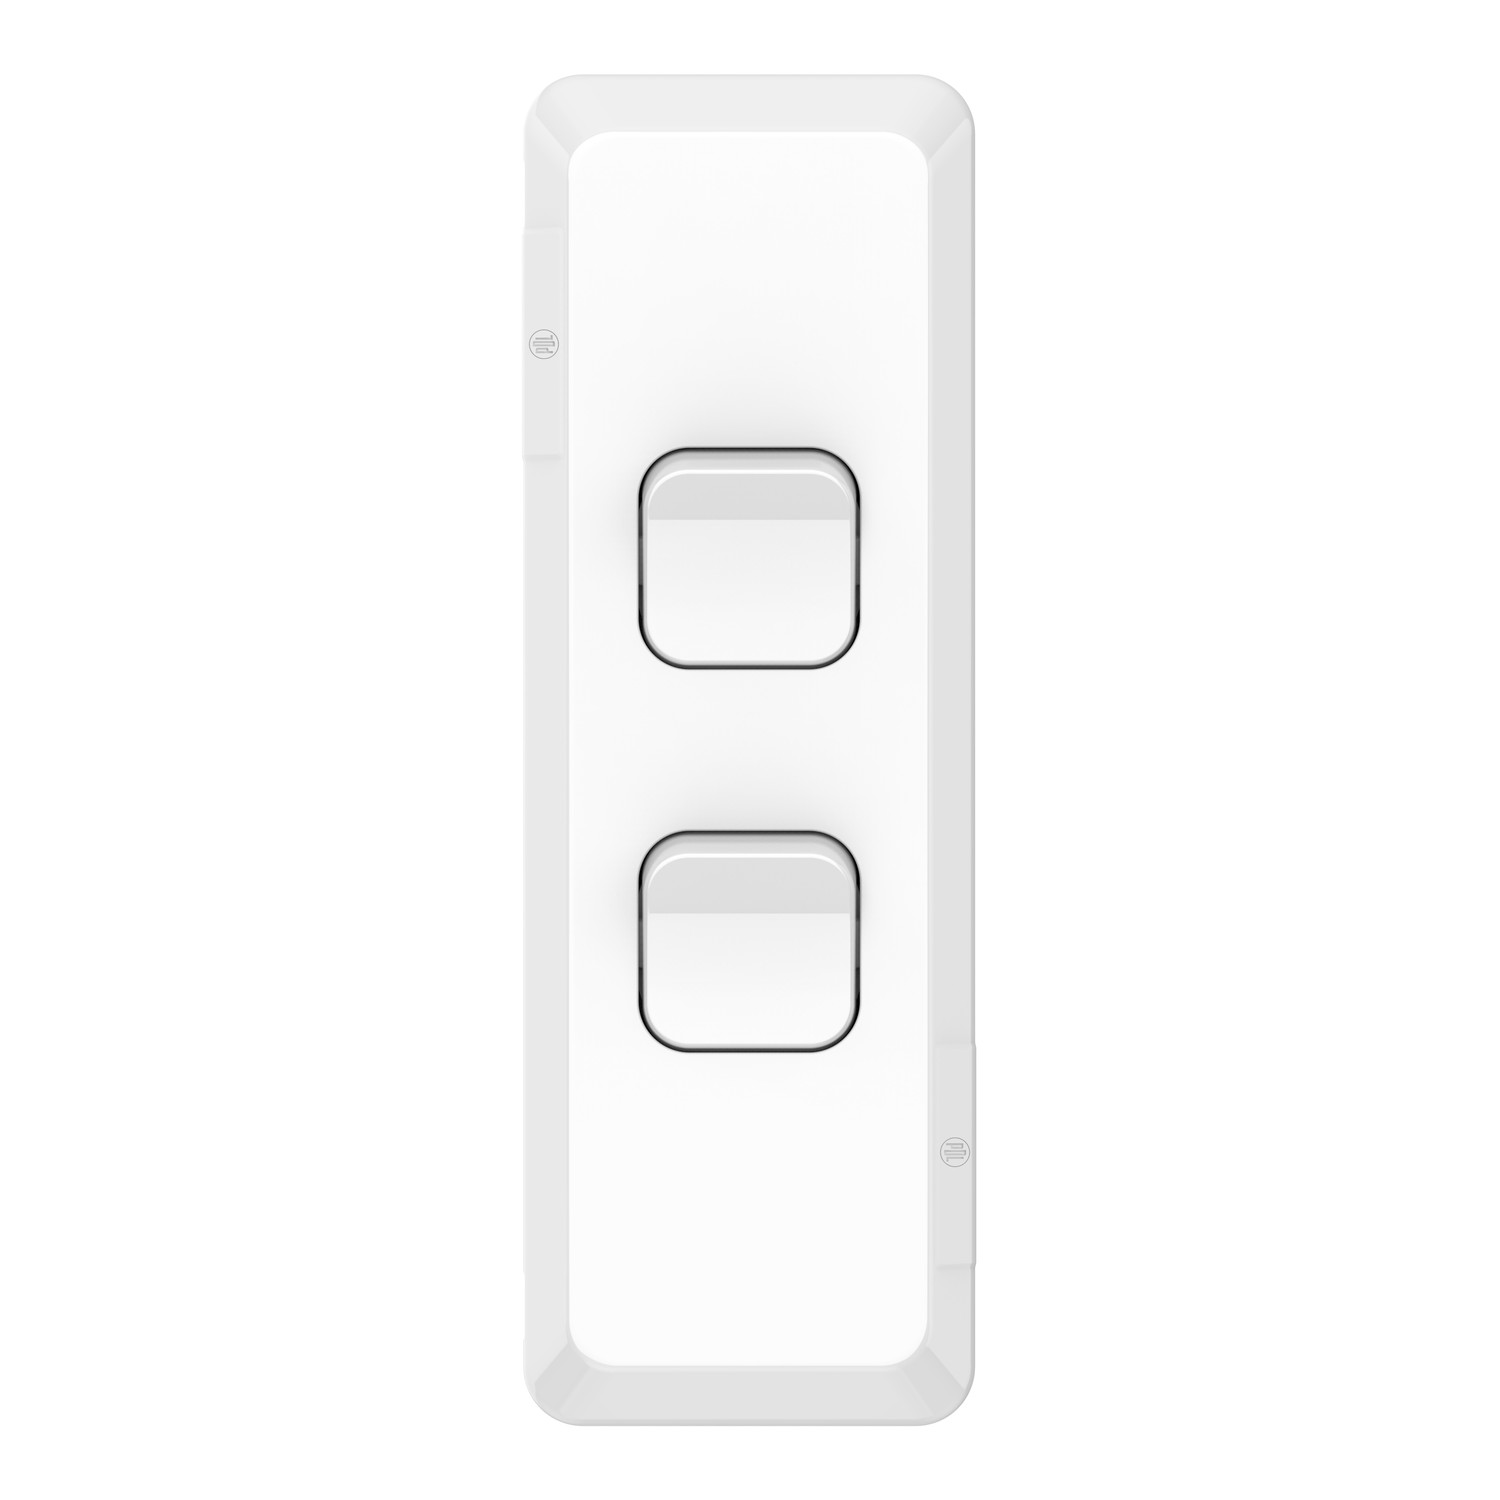 PDL Pro Series - Switch Architrave 1/2-Way 20A 16AX 2-Gang - White